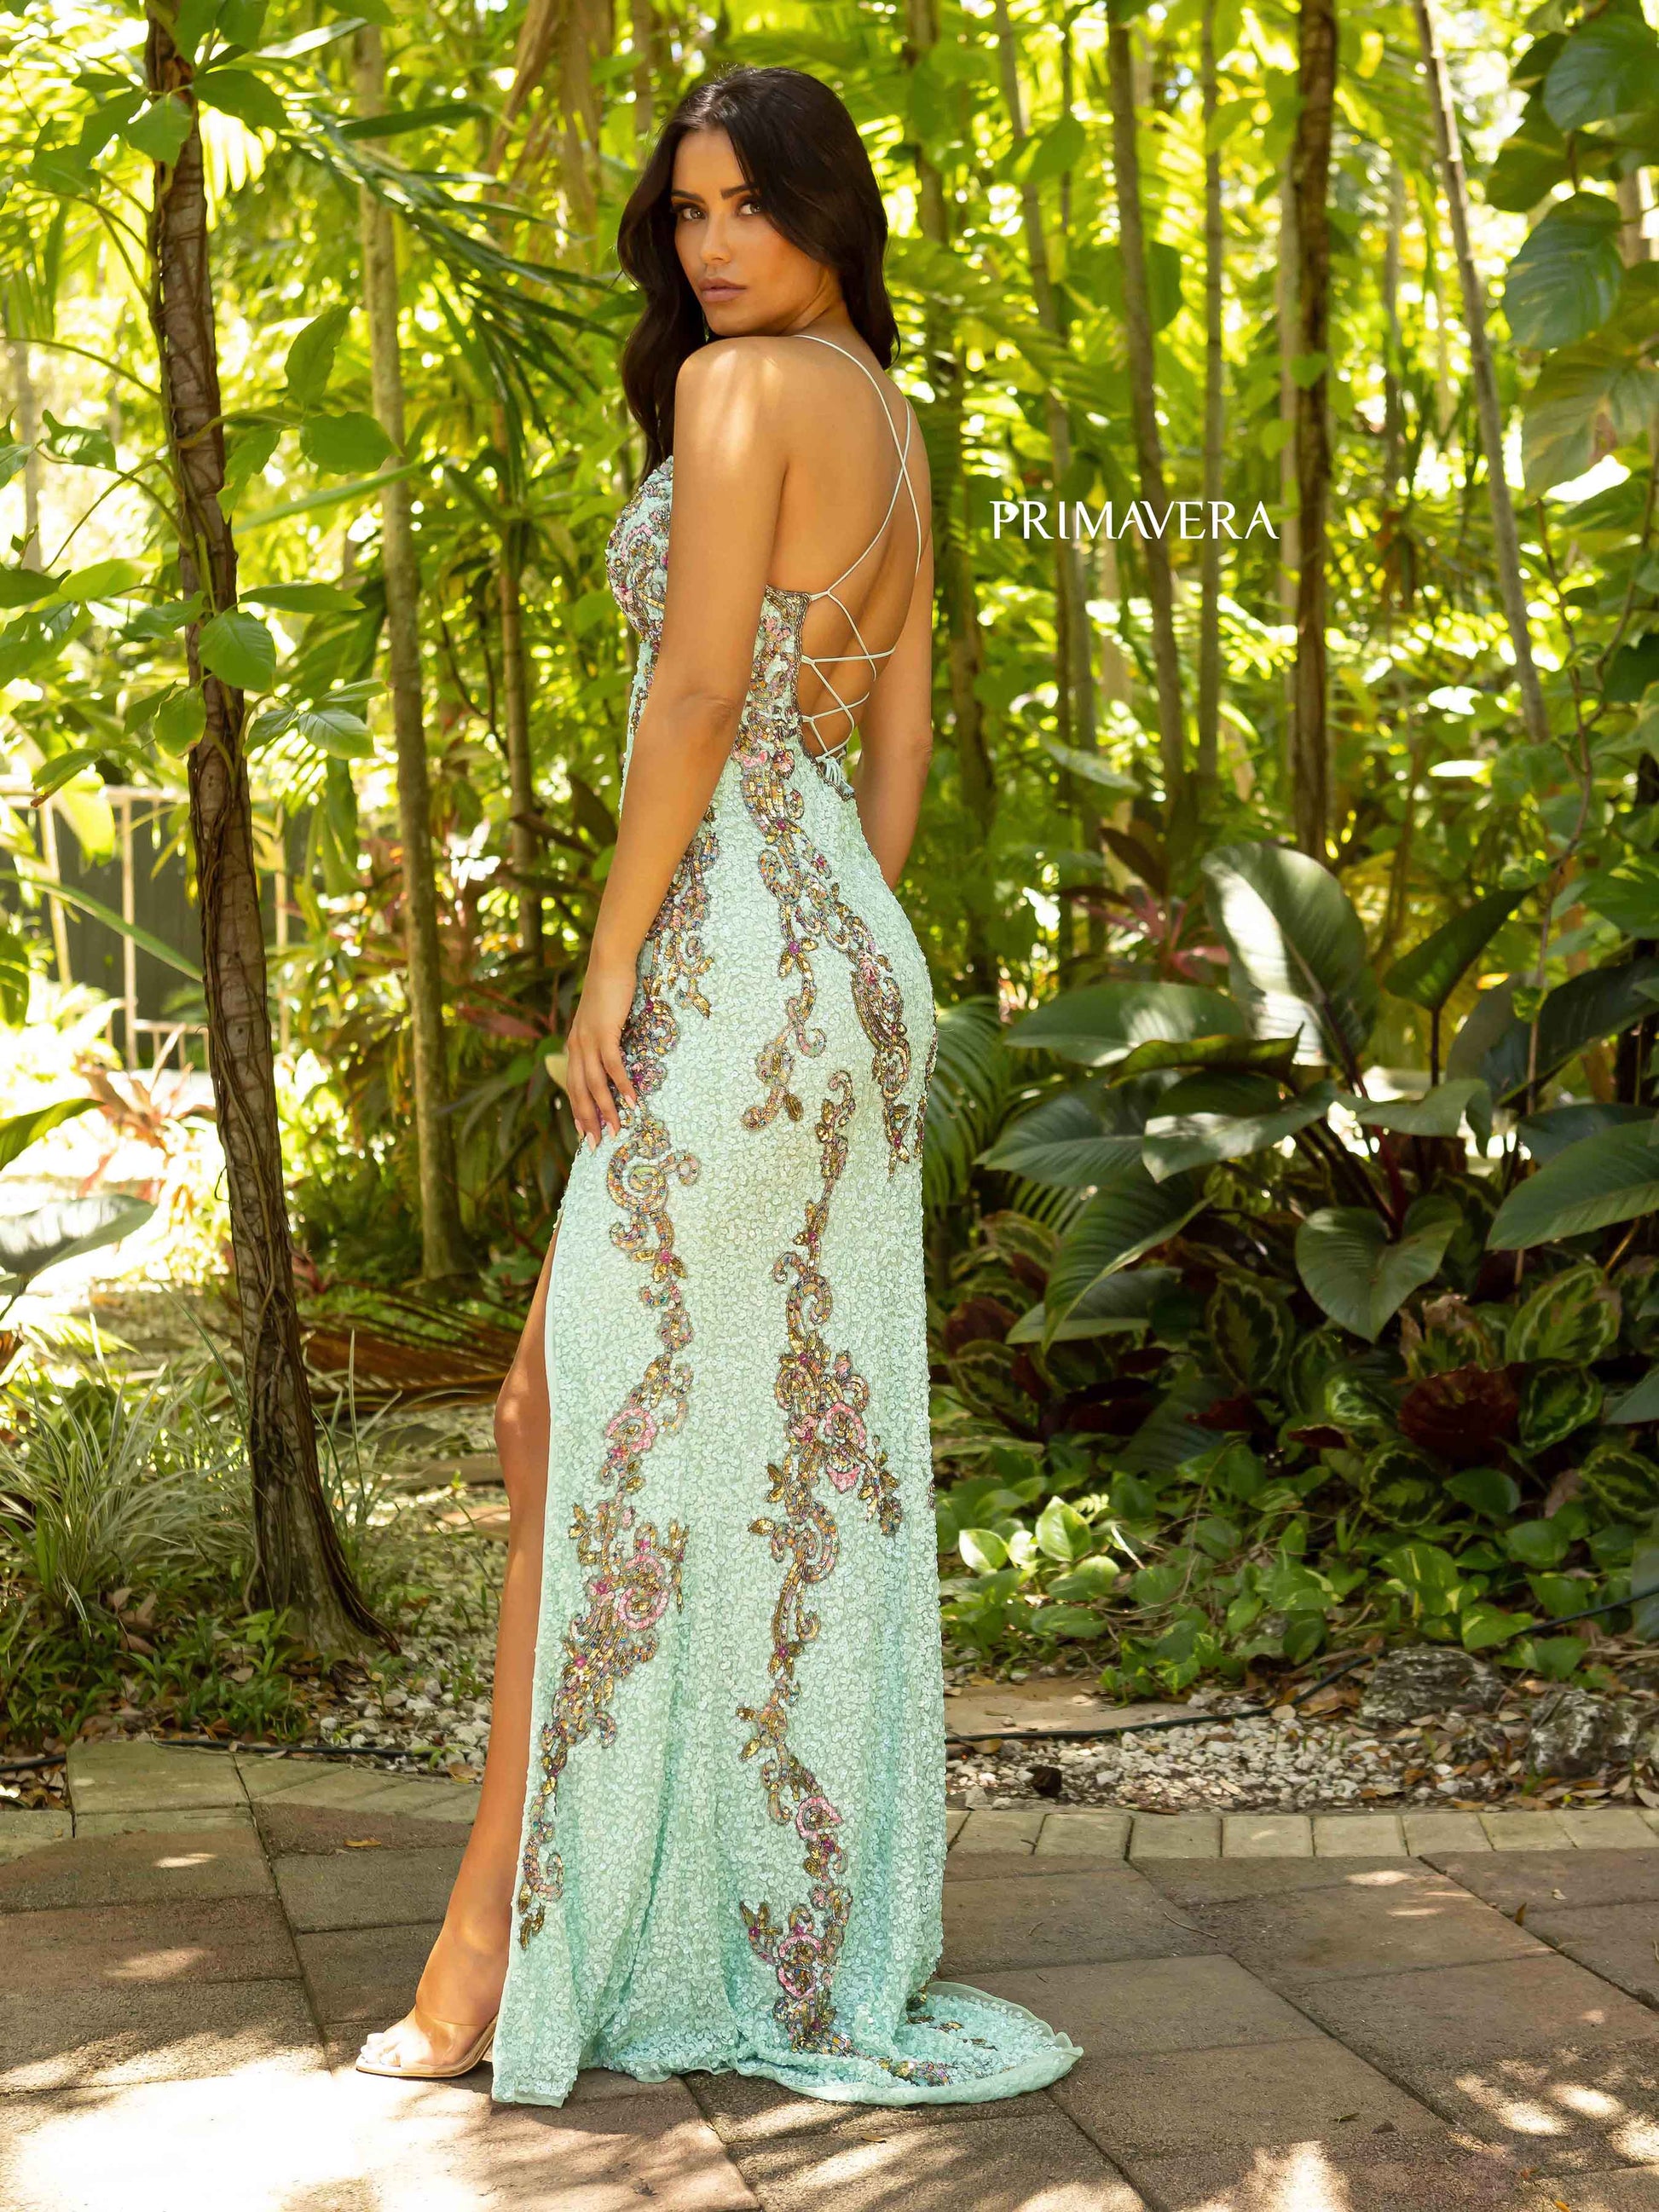 Primavera Couture 3211 Mint Green Long fitted sequin Embellished Formal Evening Gown. This Prom Dress Features a deep V Neck with an open Corset lace up back. Beaded & Embellished elegant scroll pattern accentuate curves. Fully beaded prom dress with floral pattern and side slit. Long Sequin Gown featuring a v neckline. slit in the fitted skirt, Slit in Thigh. Stunning Pageant Dress, Prom Gown & More! back